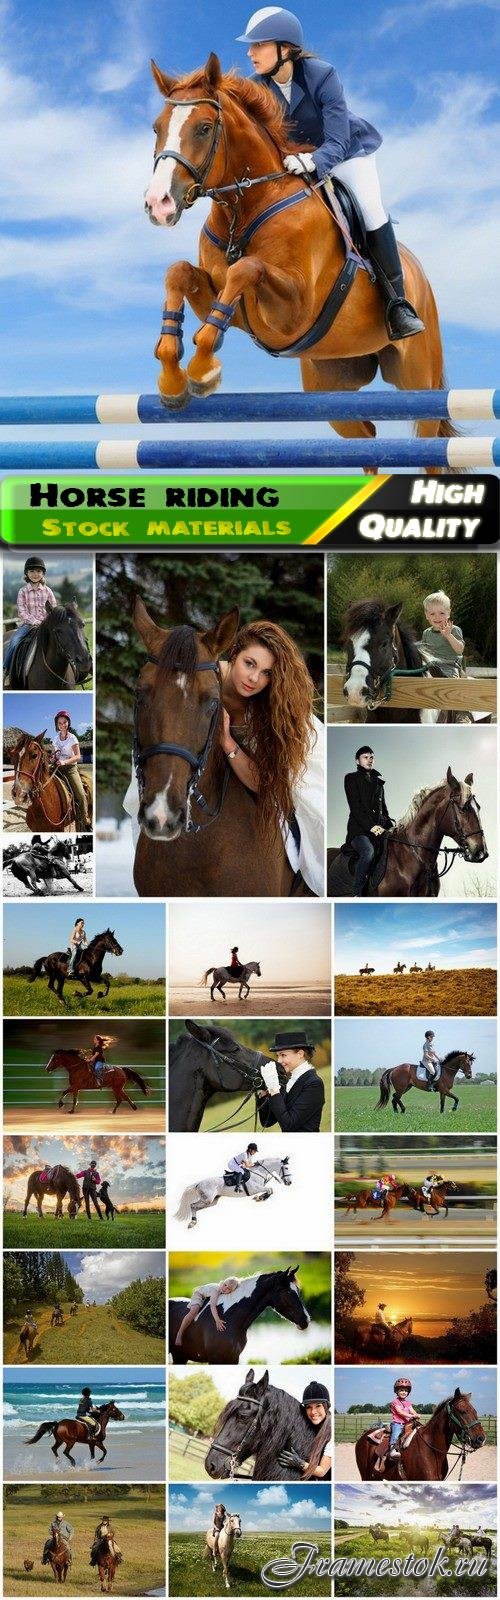 People involved in horse riding and horseback riding - 25 HQ Jpg